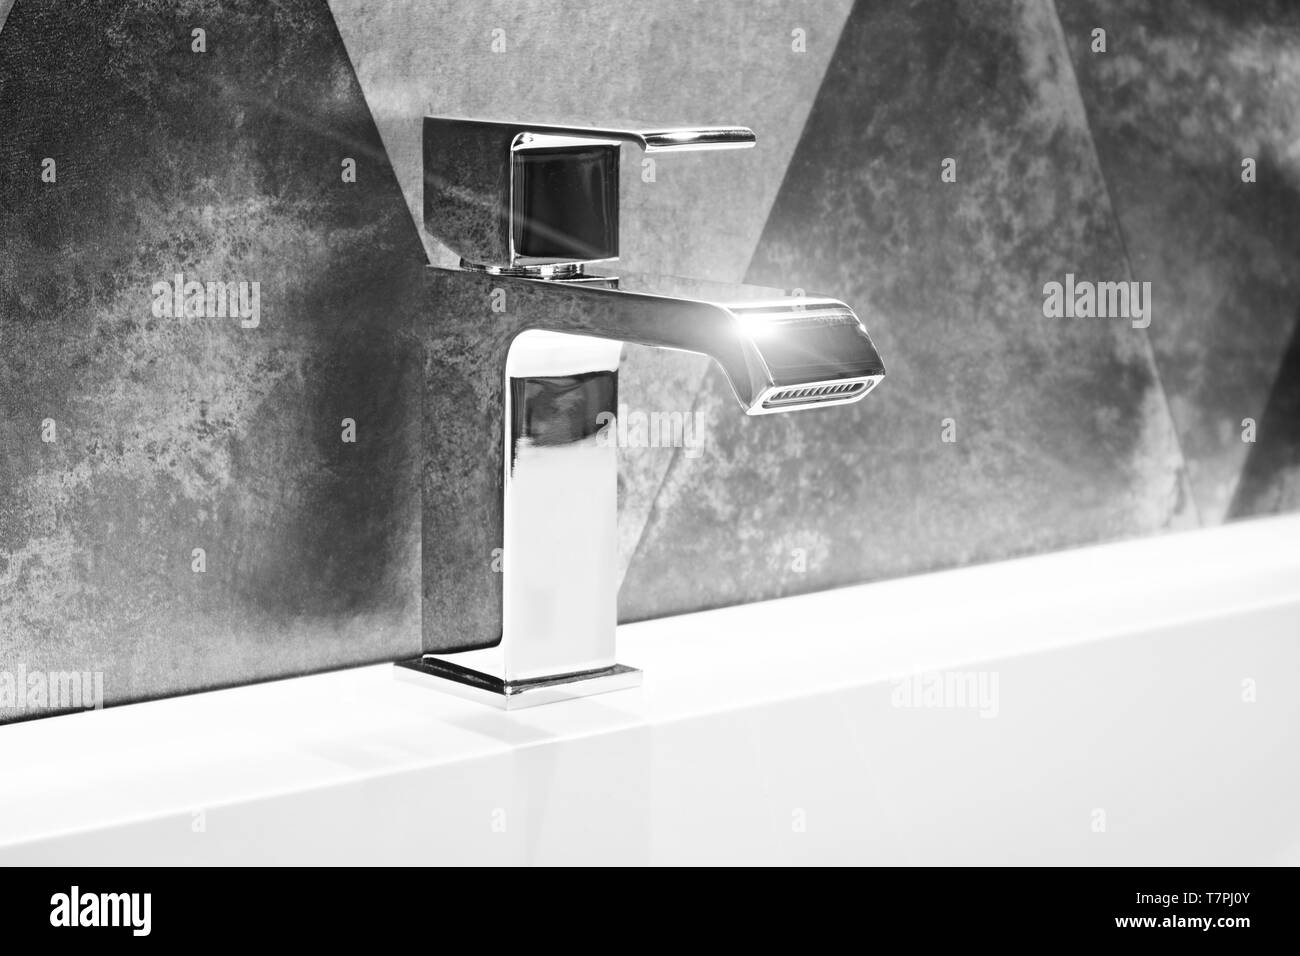 Luxury modern style faucet mixer on a white sink in a beautiful gray  metallic style bathroom Stock Photo